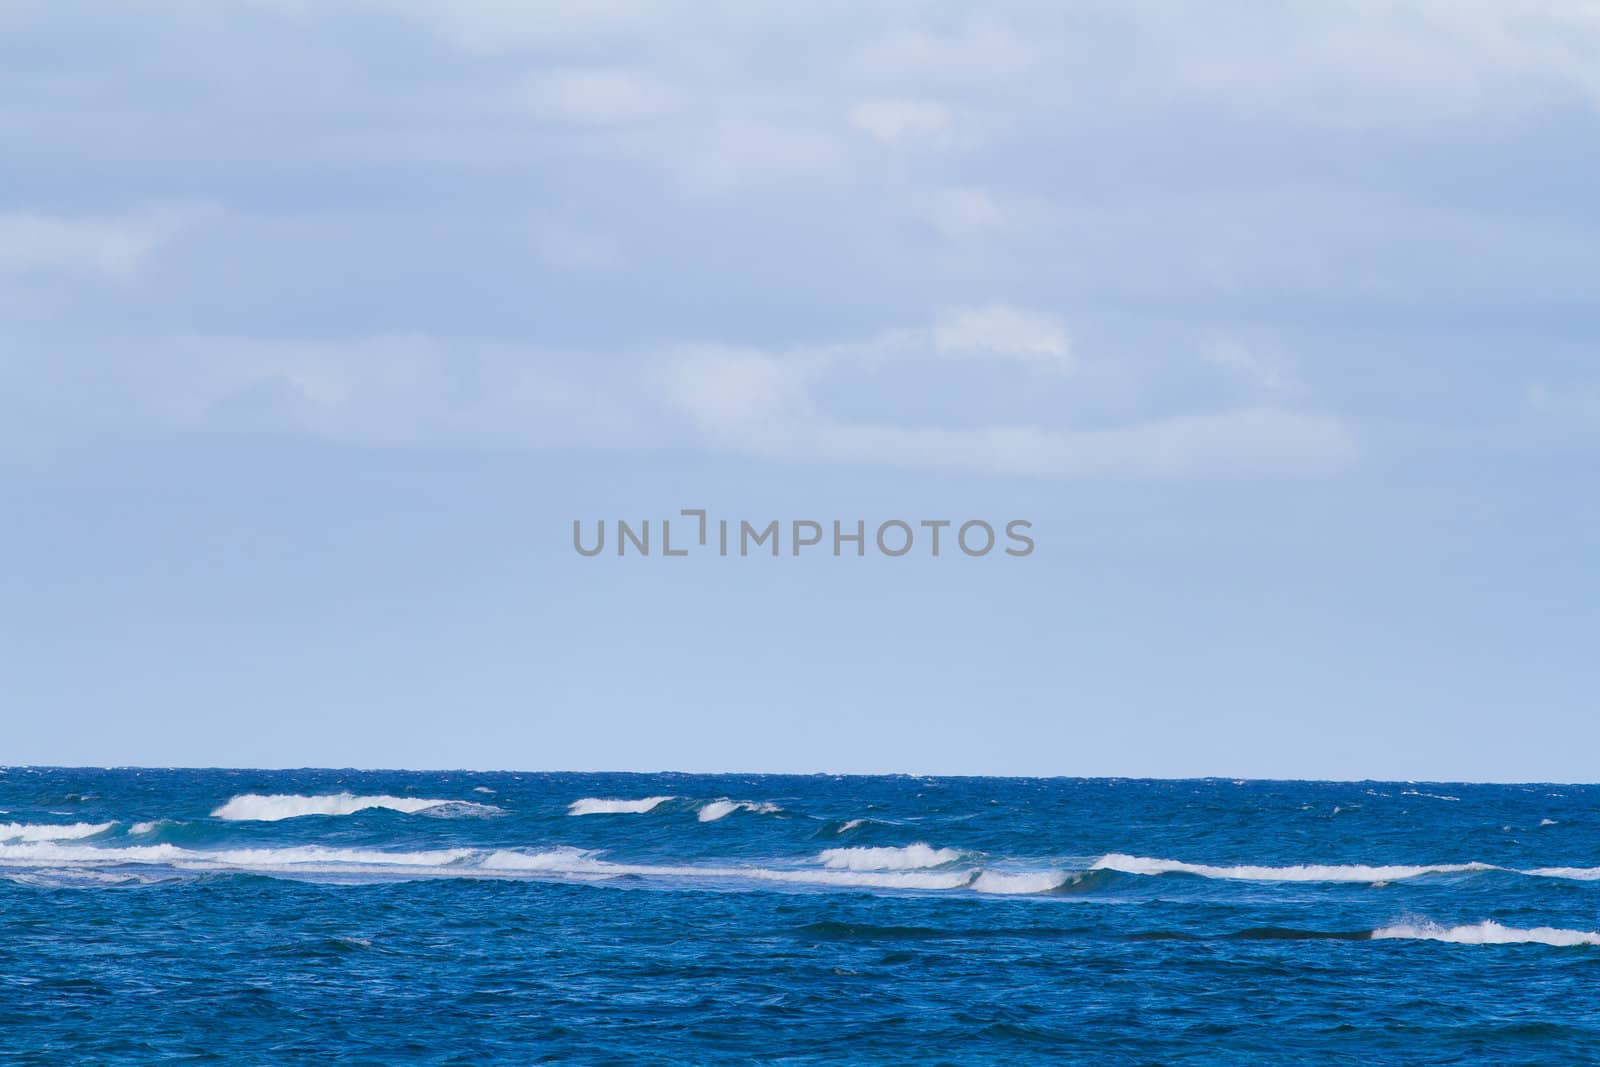 Blue water and a cloudy sky create this unique abstract landscape nature image of the Pacific Ocean. This is off the coast of the north shore of Oahu during a storm with rough water.